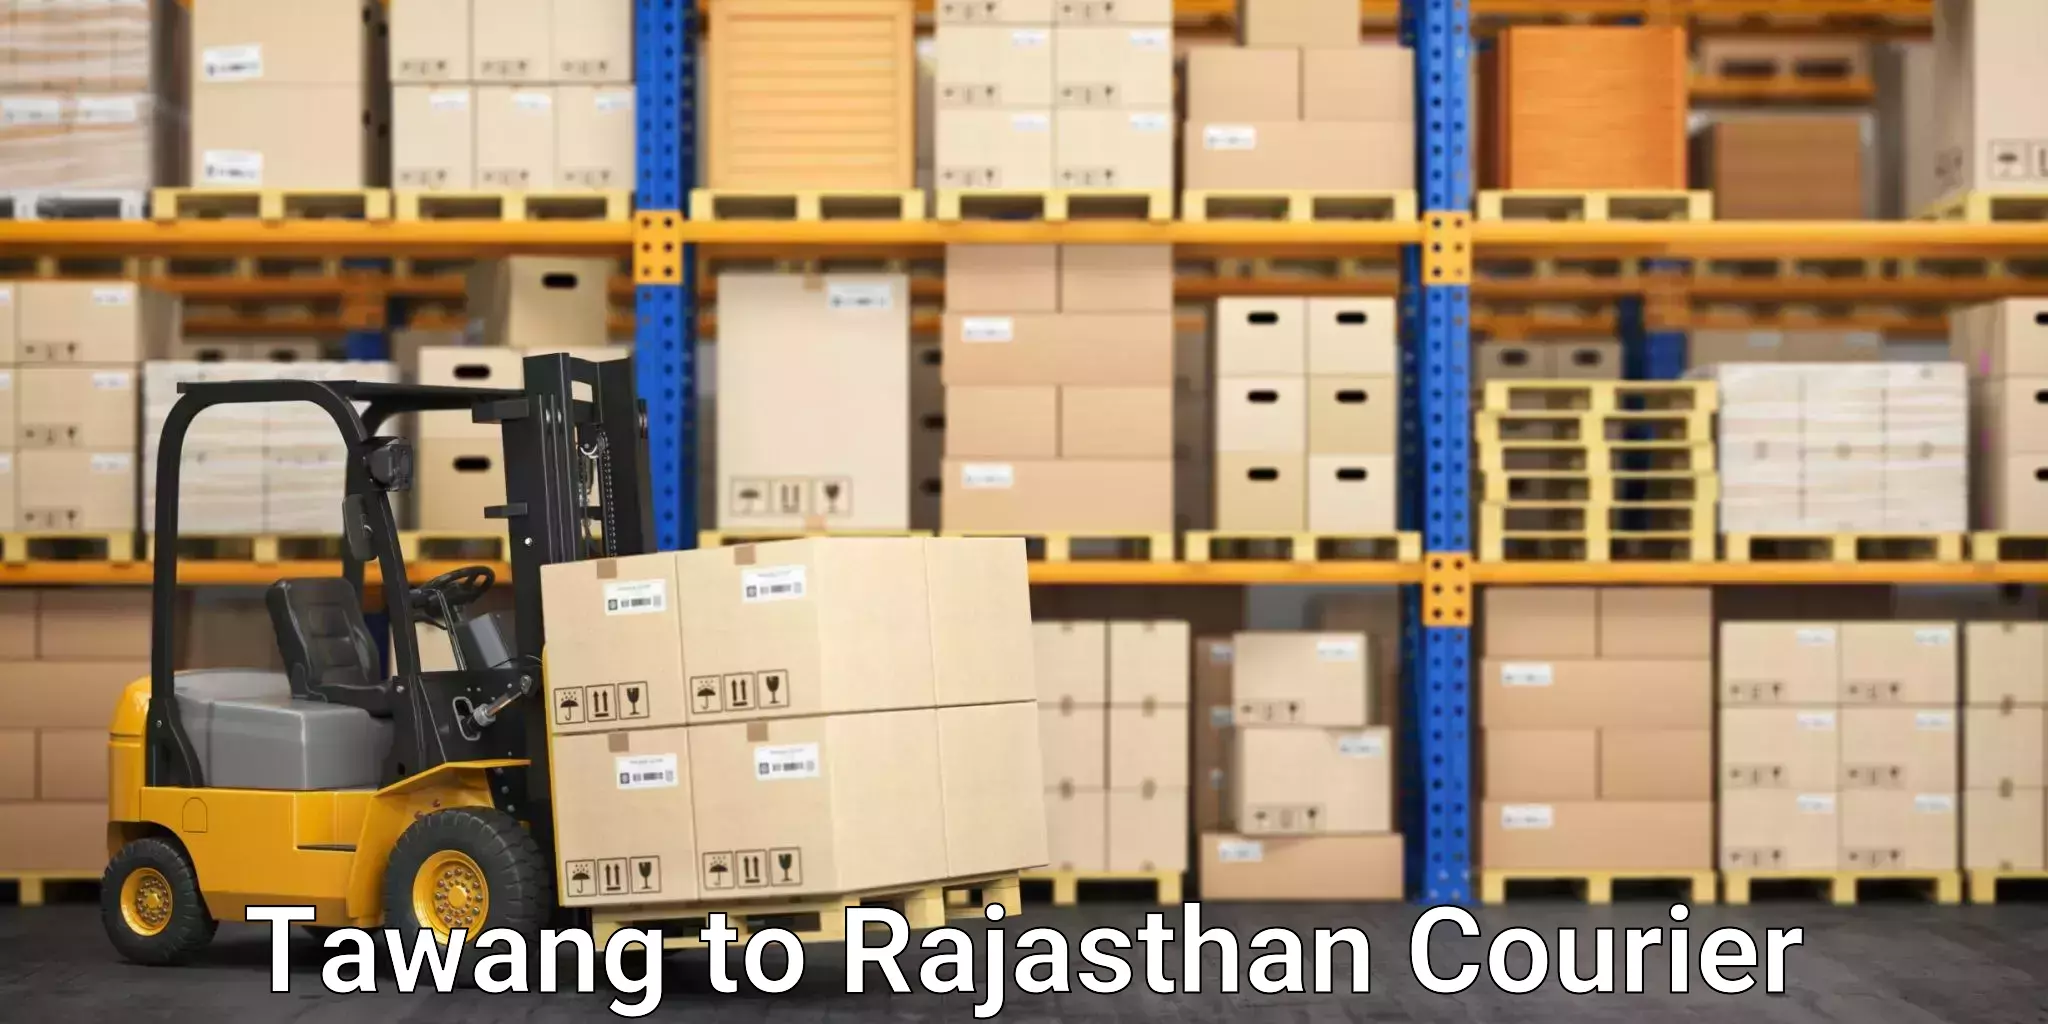 Subscription-based courier Tawang to Rajasthan